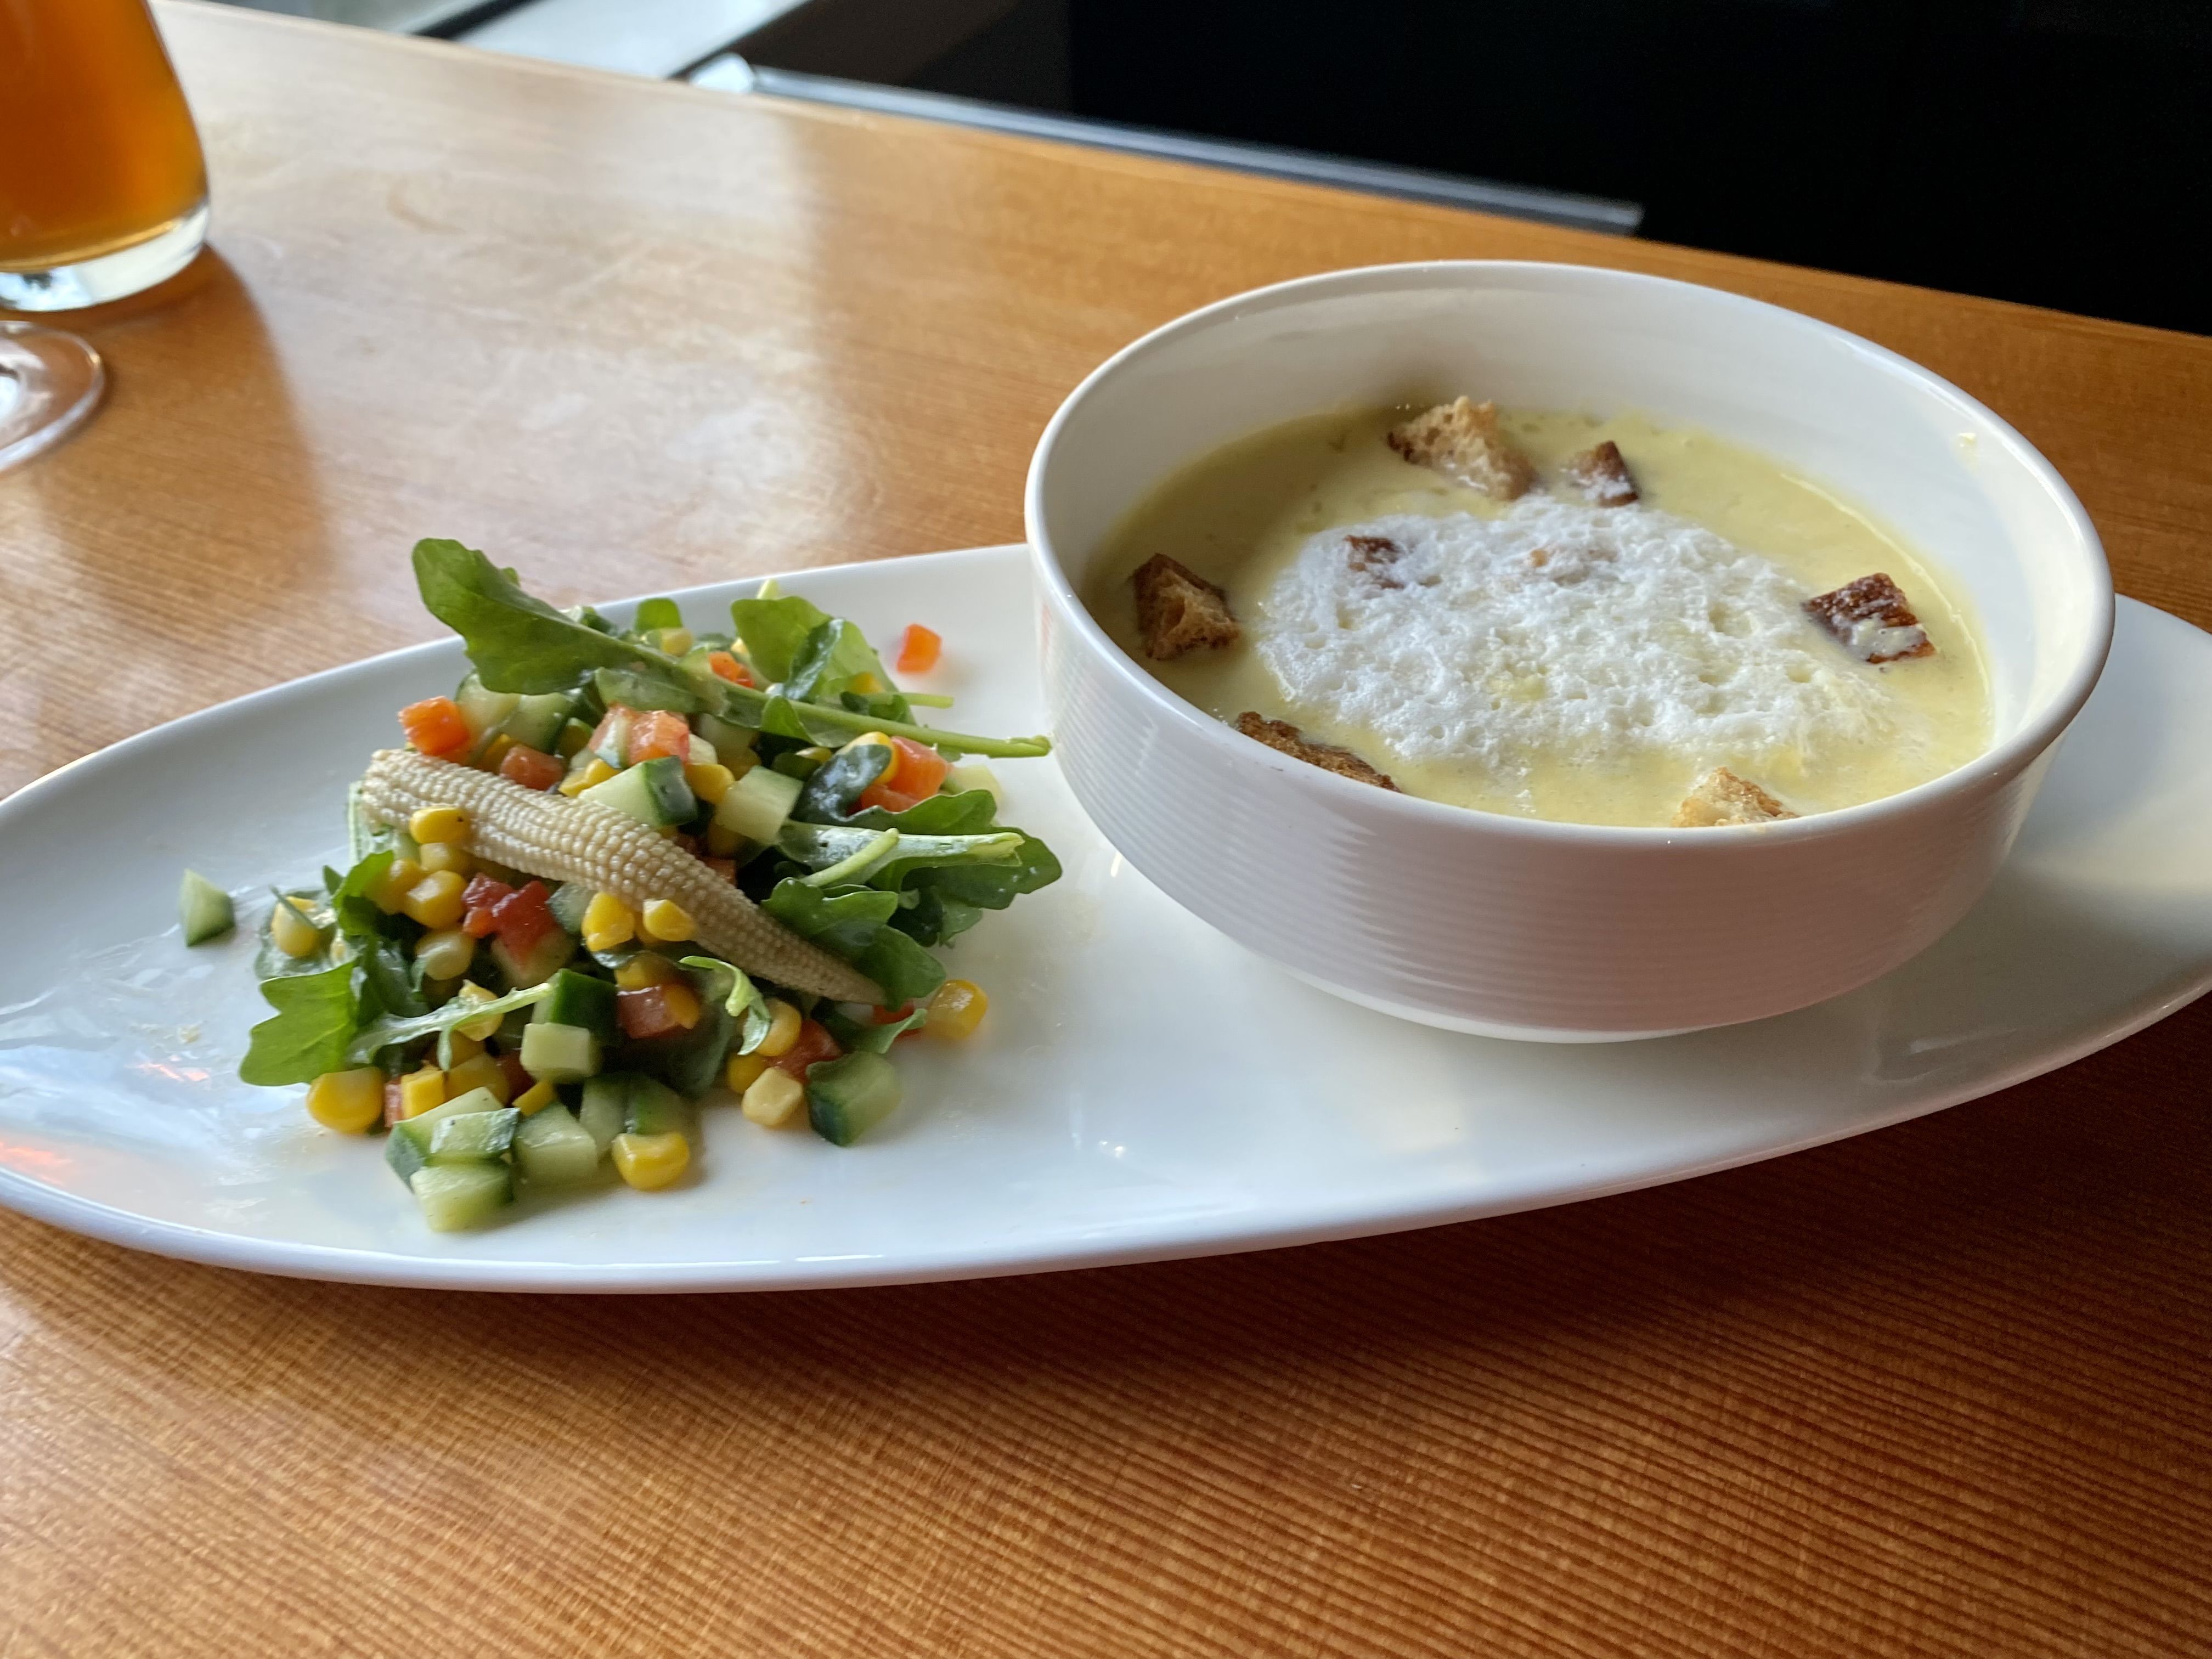 A salad of summer vegetables on an oblong plate next to a bowl filled with yellow corn soup.